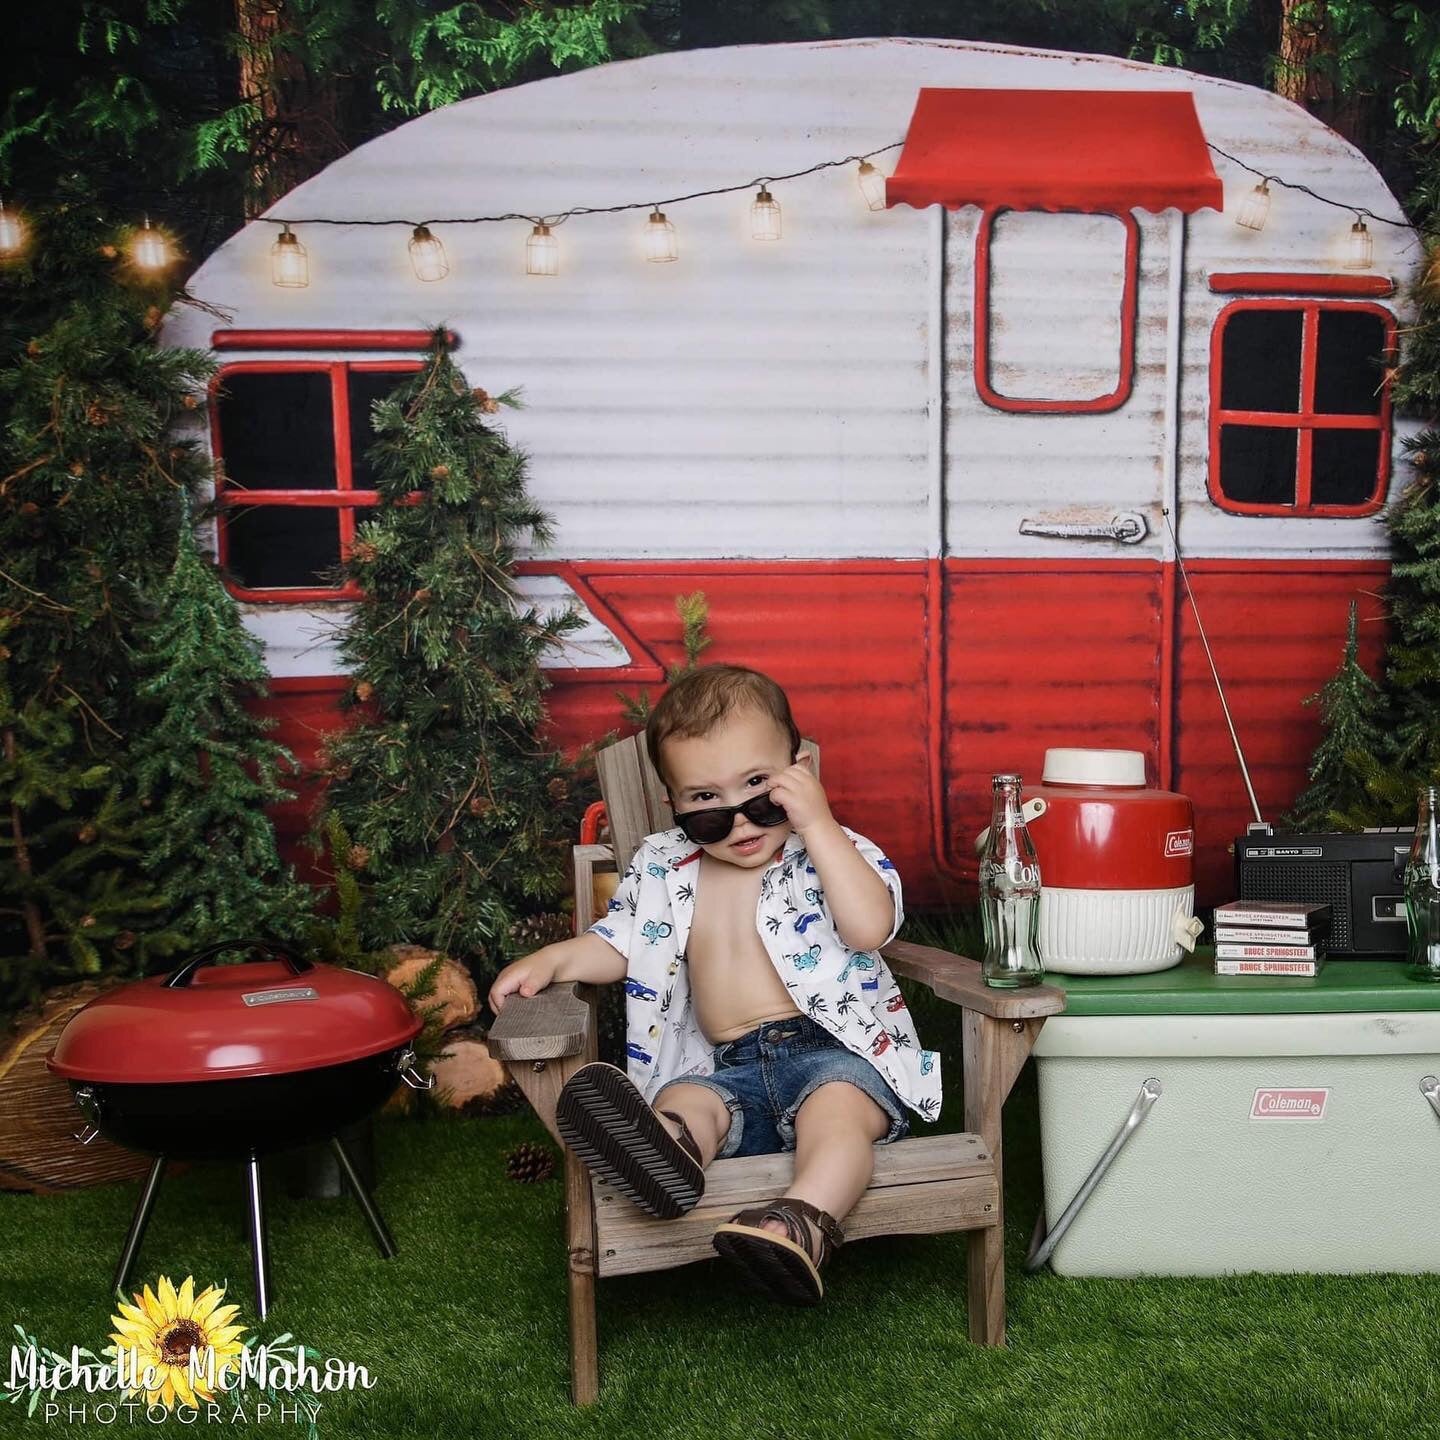 Gone Camping – Baby Dream Backdrops